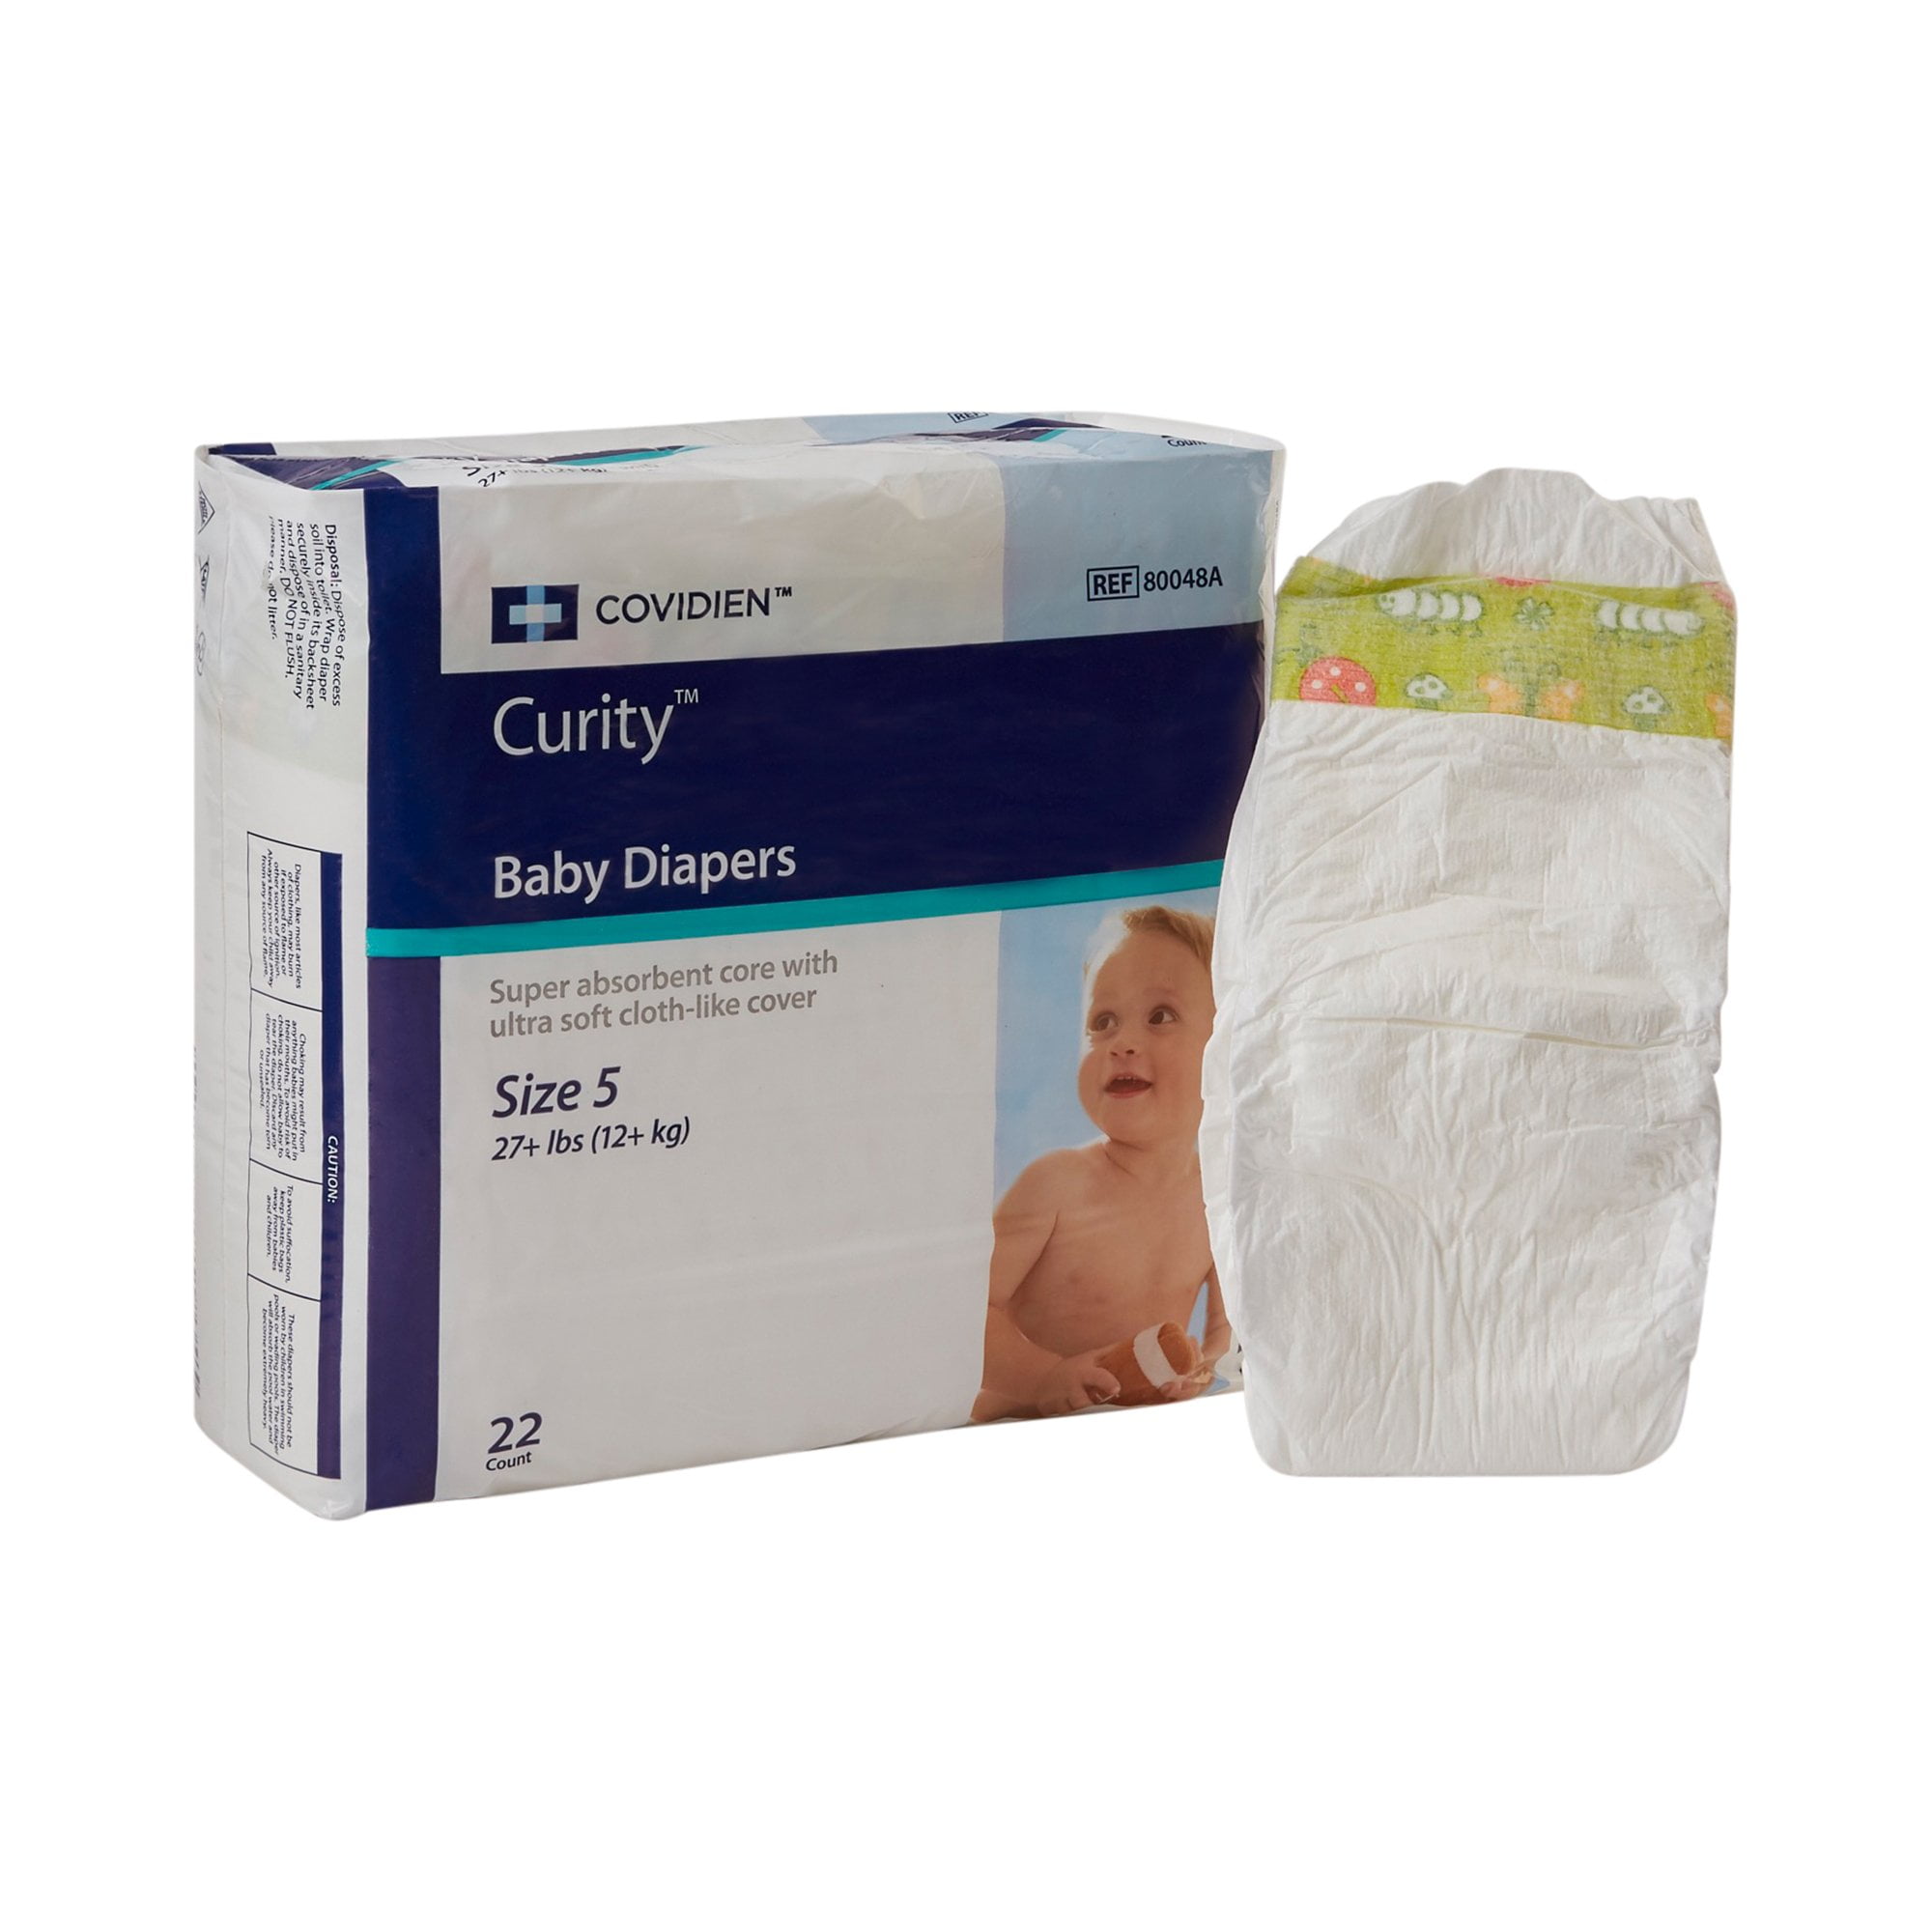 Dodot Extra Sensitive Size 5 48 Units Diapers Clear